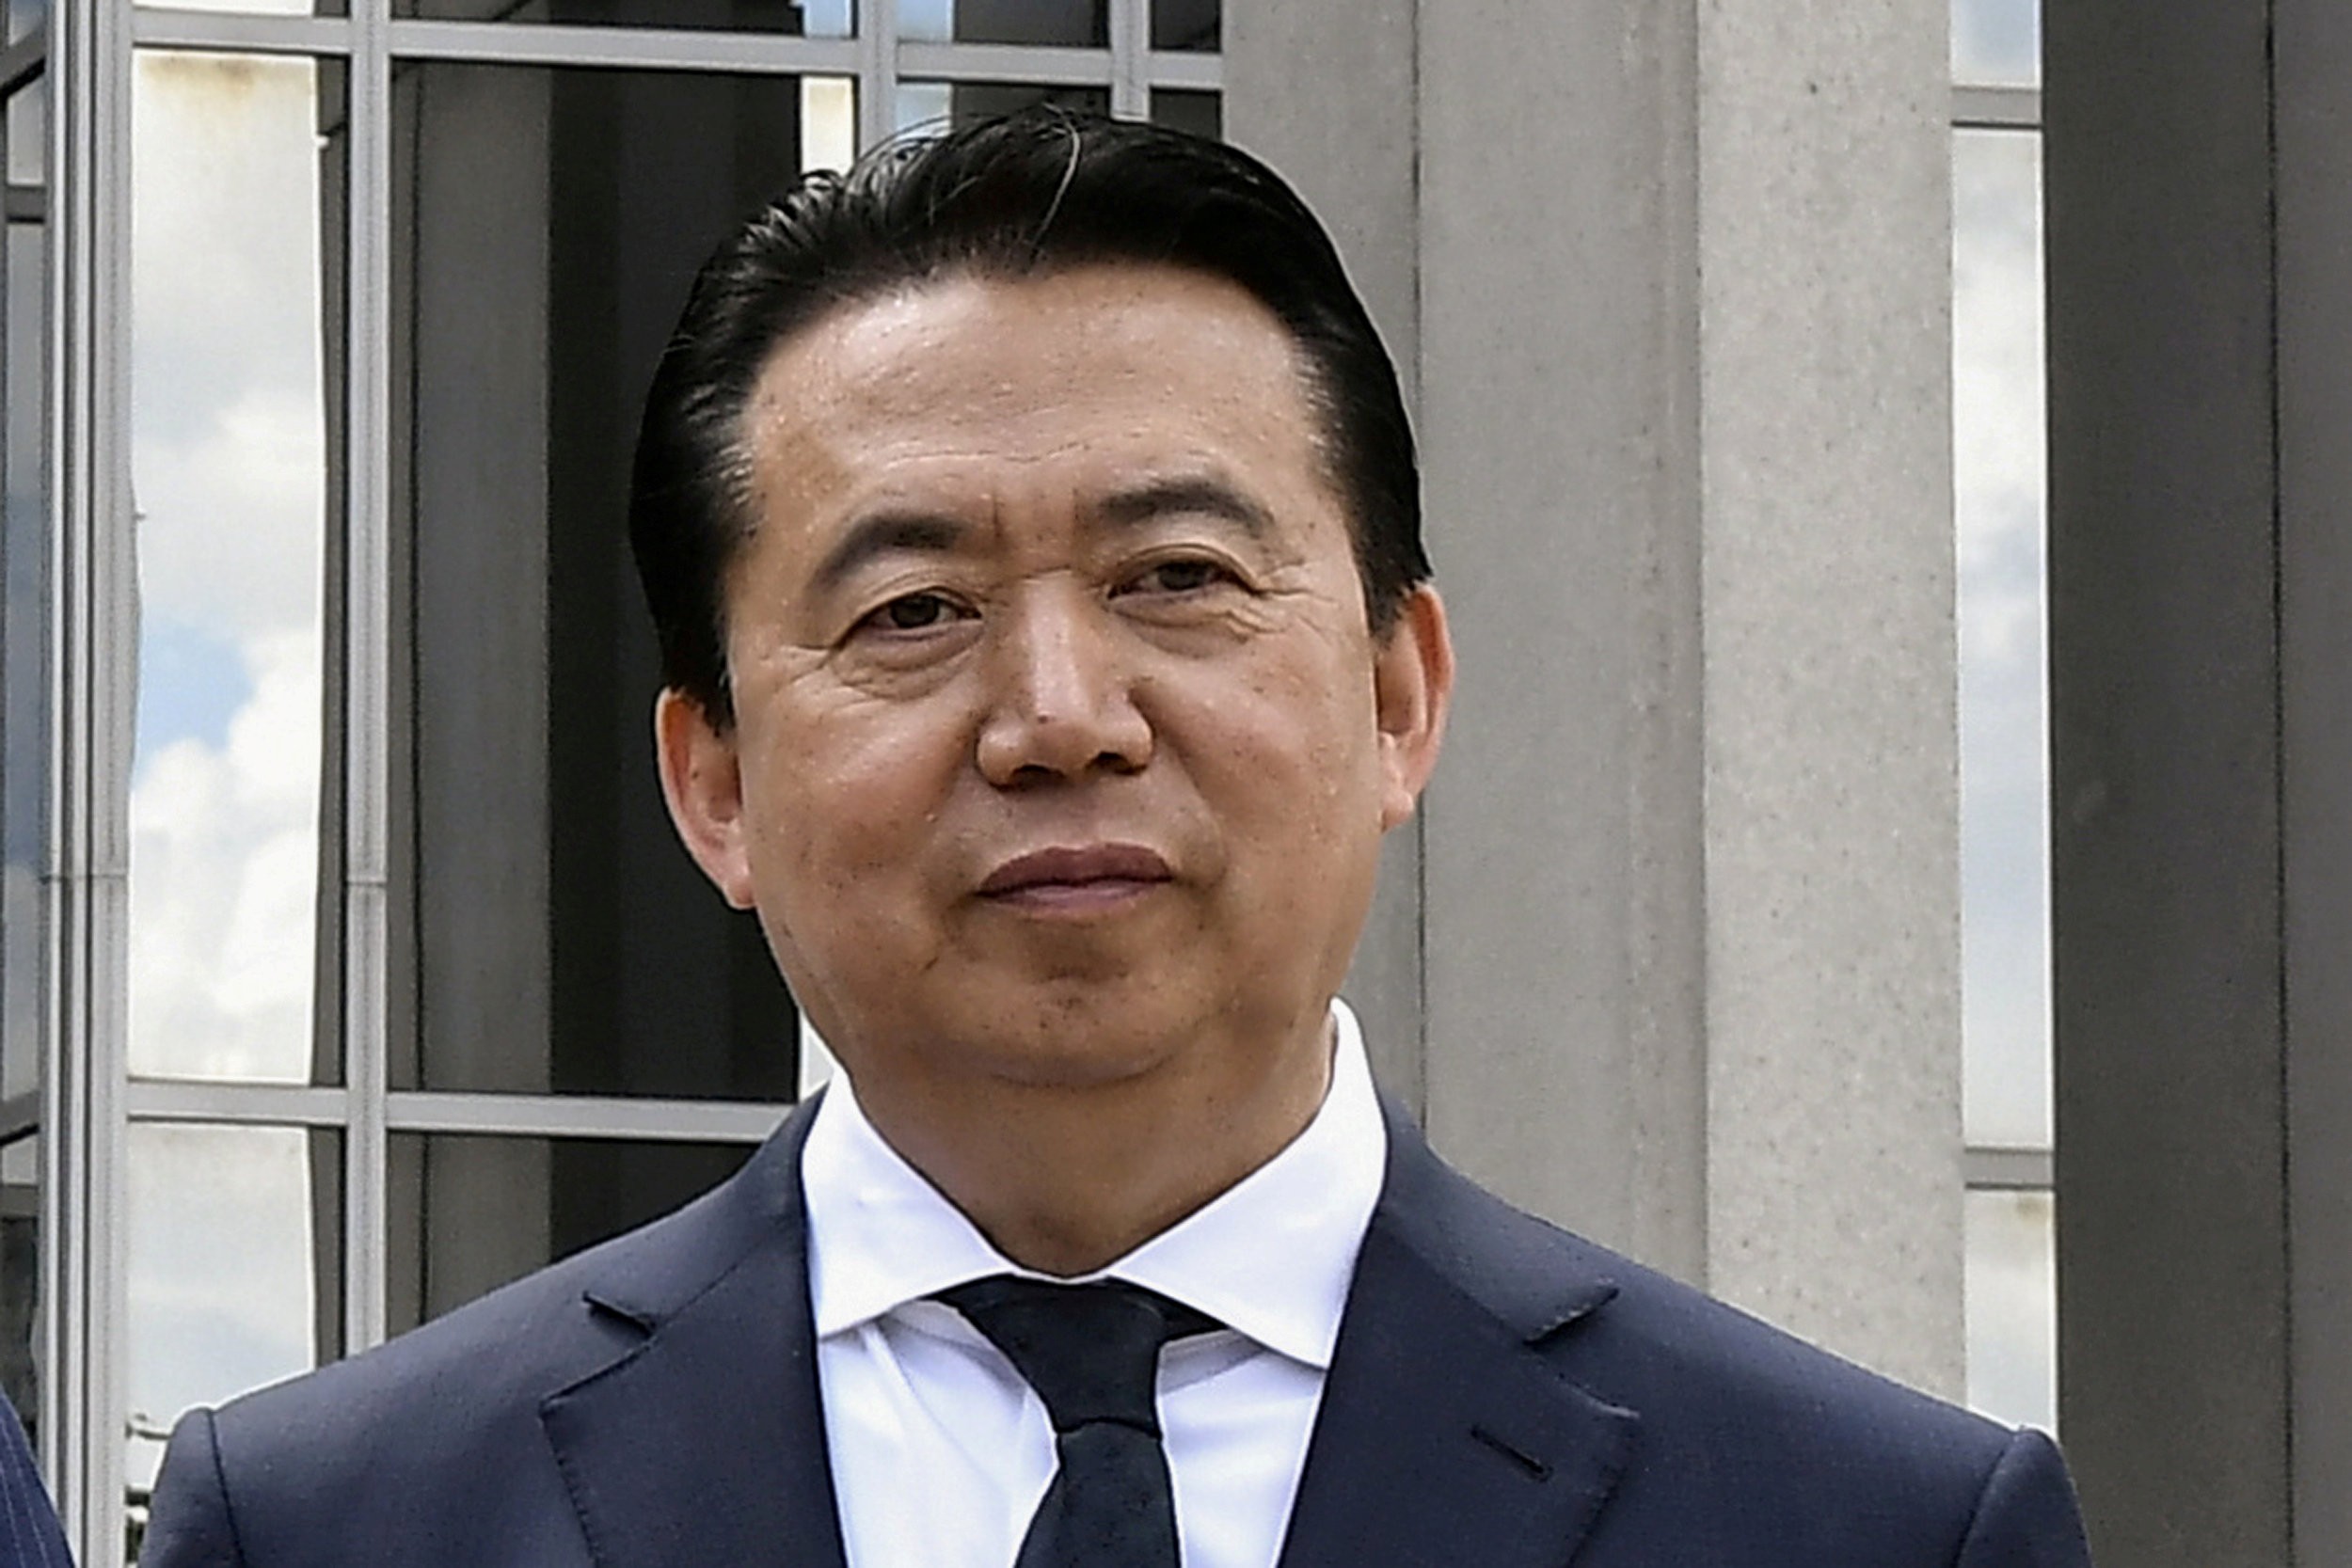 Meng Hongwei, who stepped down as head of Interpol and faces corruption charges in China, has been expelled from a government advisory body. Photo: Reuters